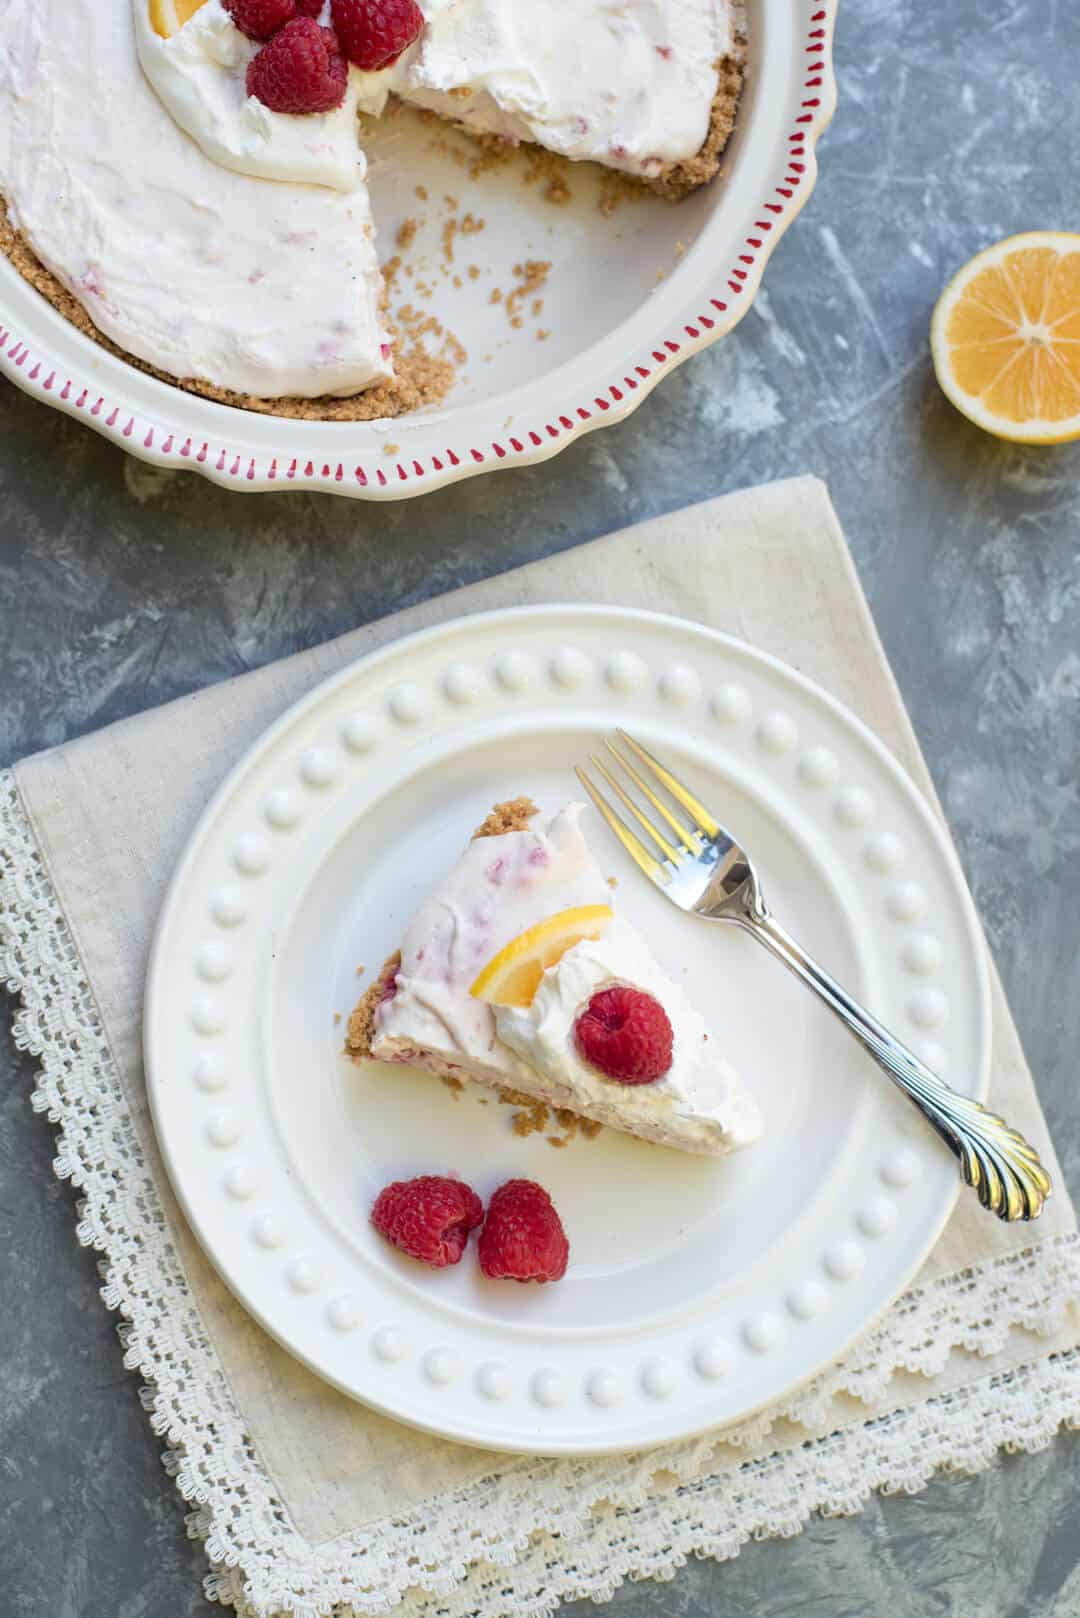 An over the top shot of a slice of Lemon Raspberry Pie on a white plate with raspberries.